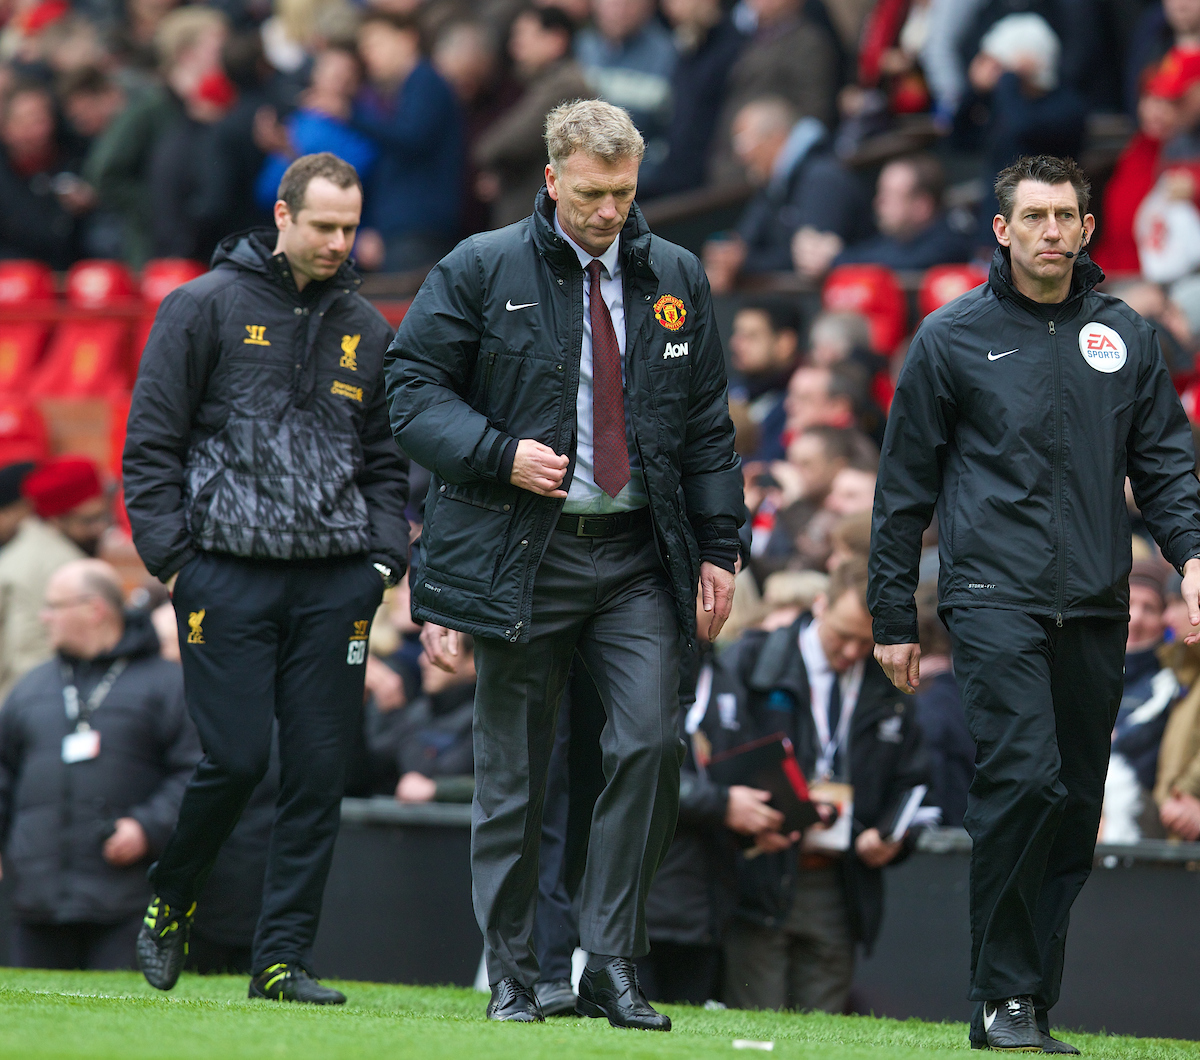 MANCHESTER, ENGLAND - Sunday, March 16, 2014: Manchester United's manager David Moyes looks dejected at half time during the Premiership match against Liverpool at Old Trafford. (Pic by David Rawcliffe/Propaganda)